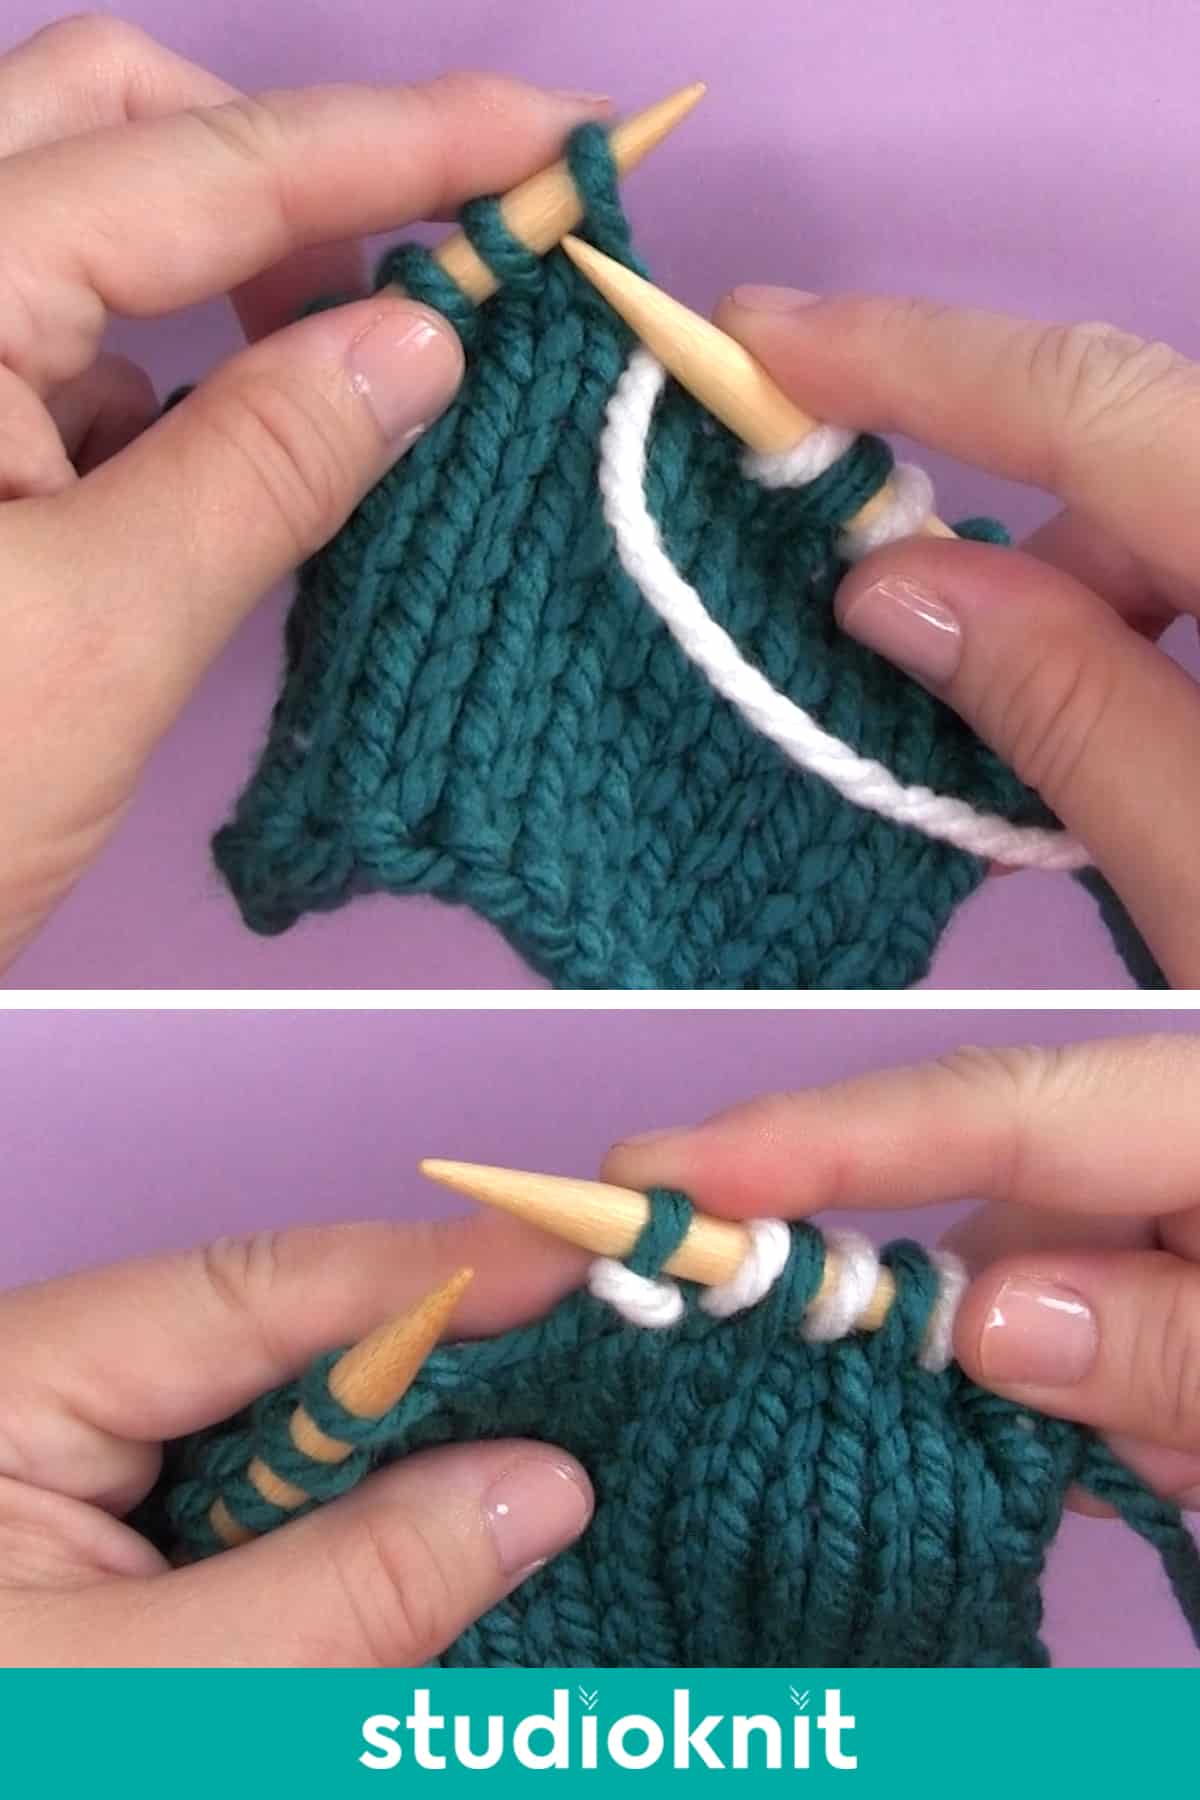 Demonstration of a Slip Stitch Knitwise on Knit Side with Yarn in Front.